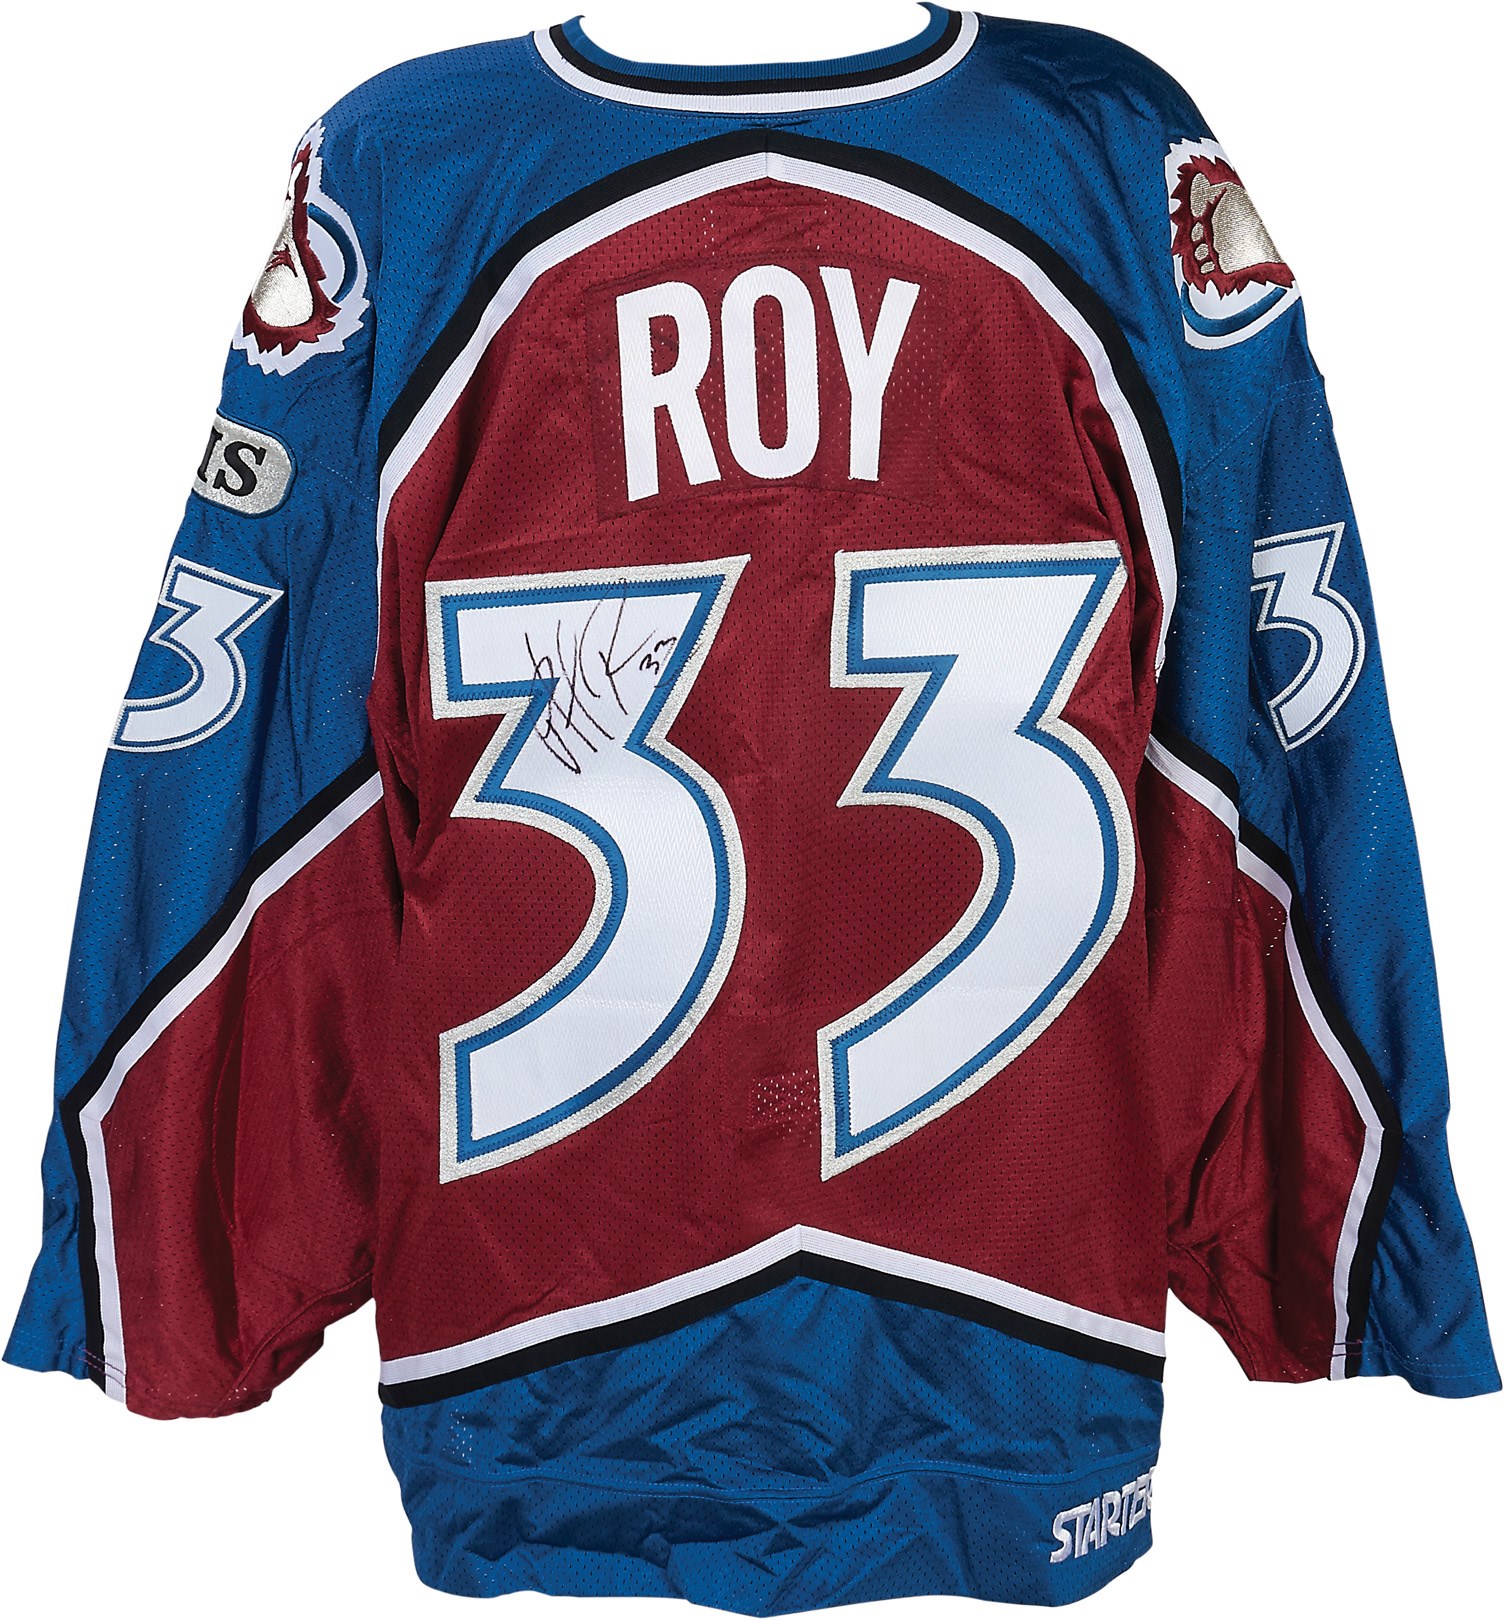 Hockey - 1998-99 Patrick Roy Colorado Avalanche Playoff Game Worn Jersey (Photo-Matched, MeiGray LOA)